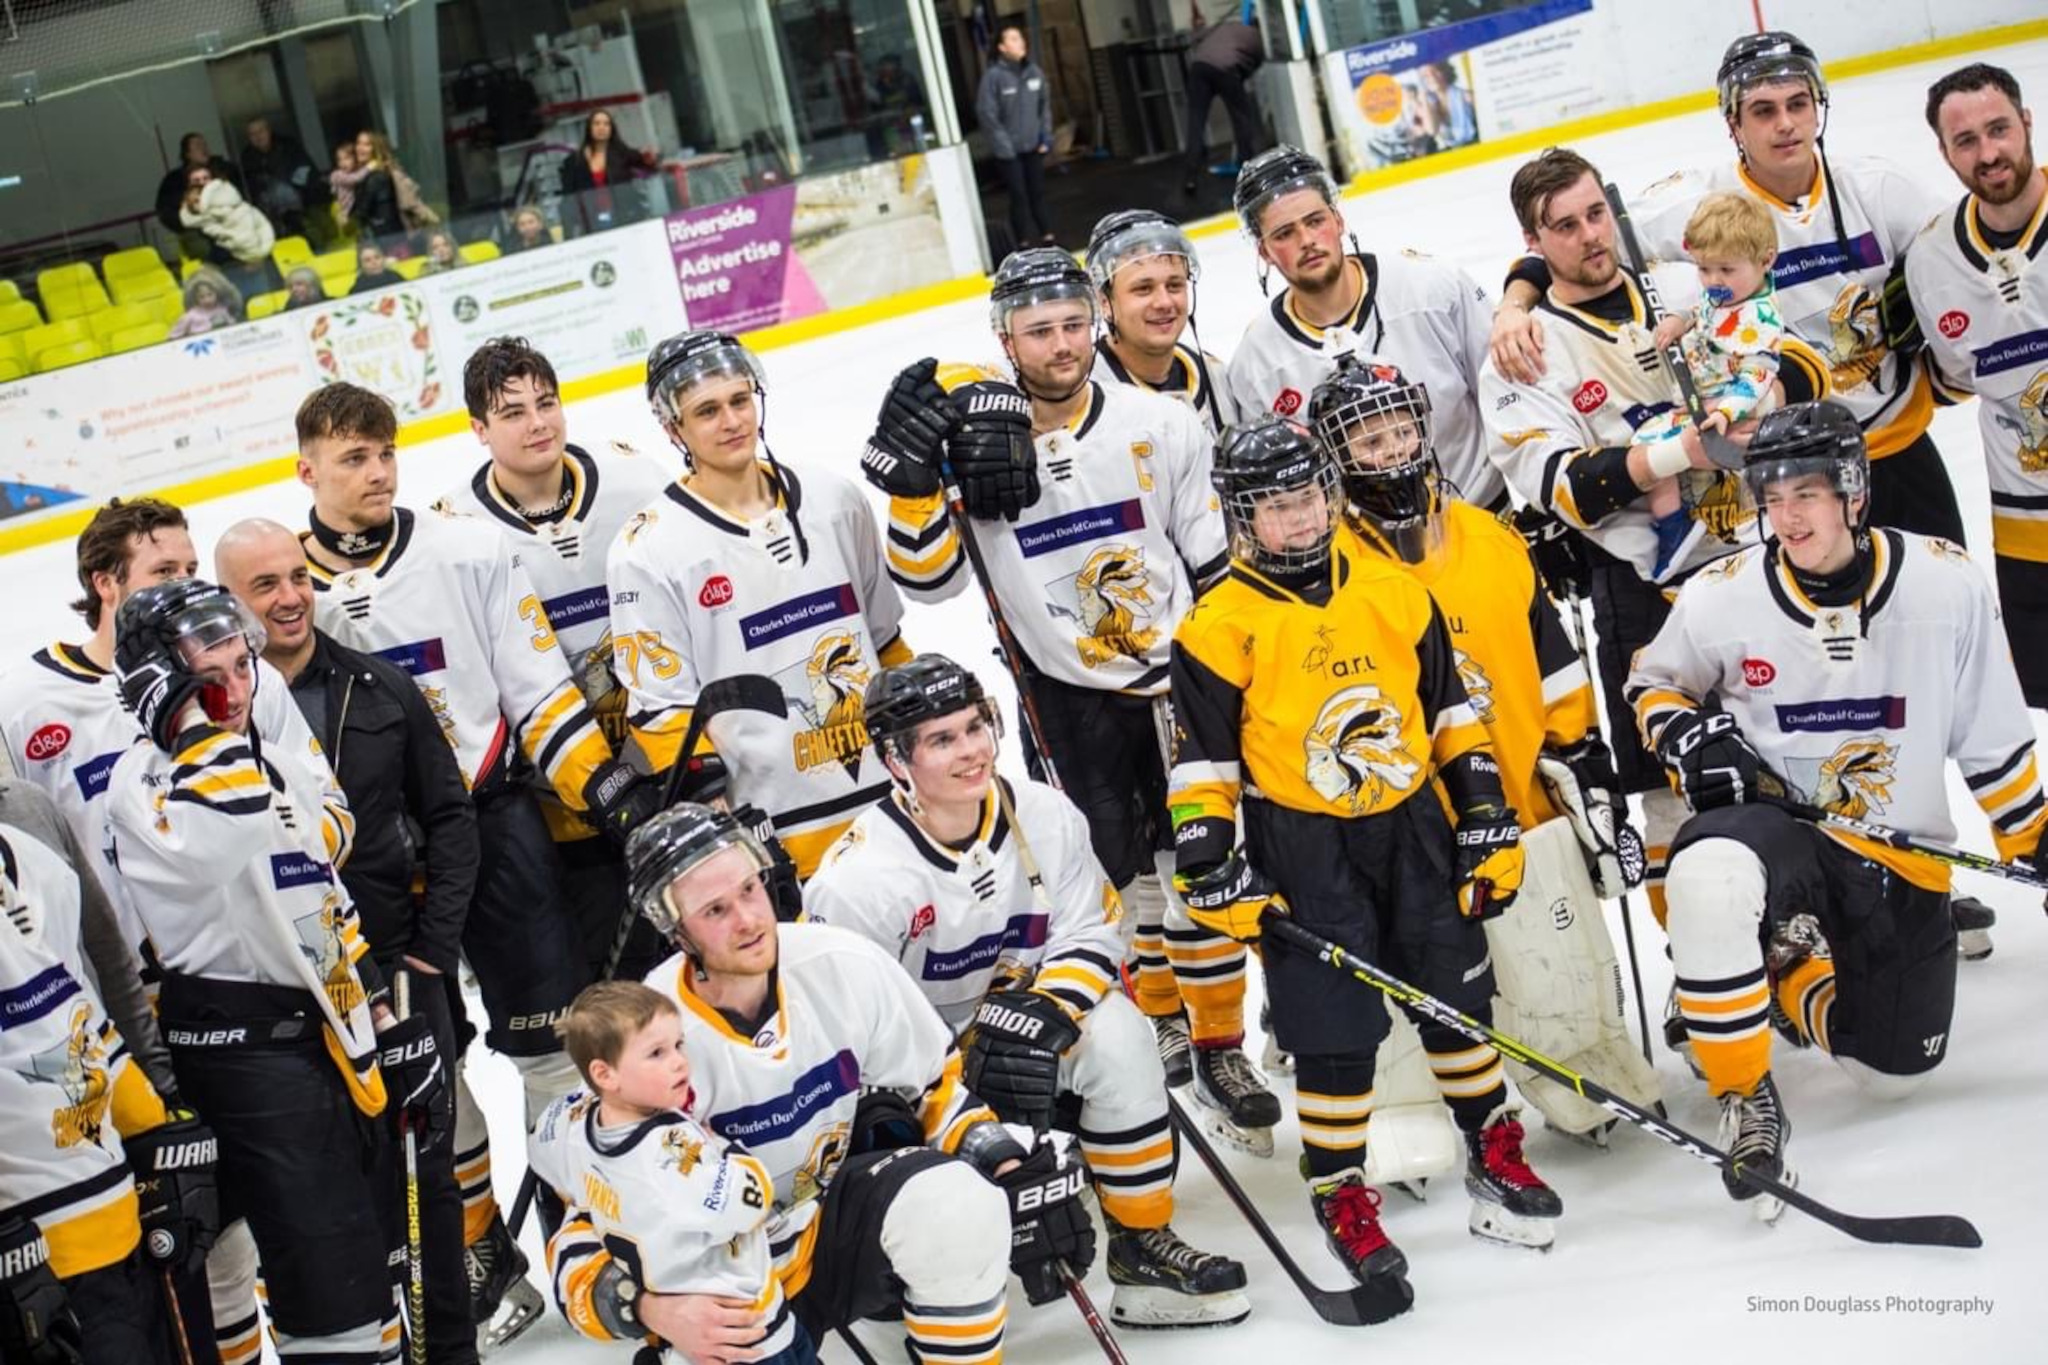 News Report - Chelmsford Chieftains